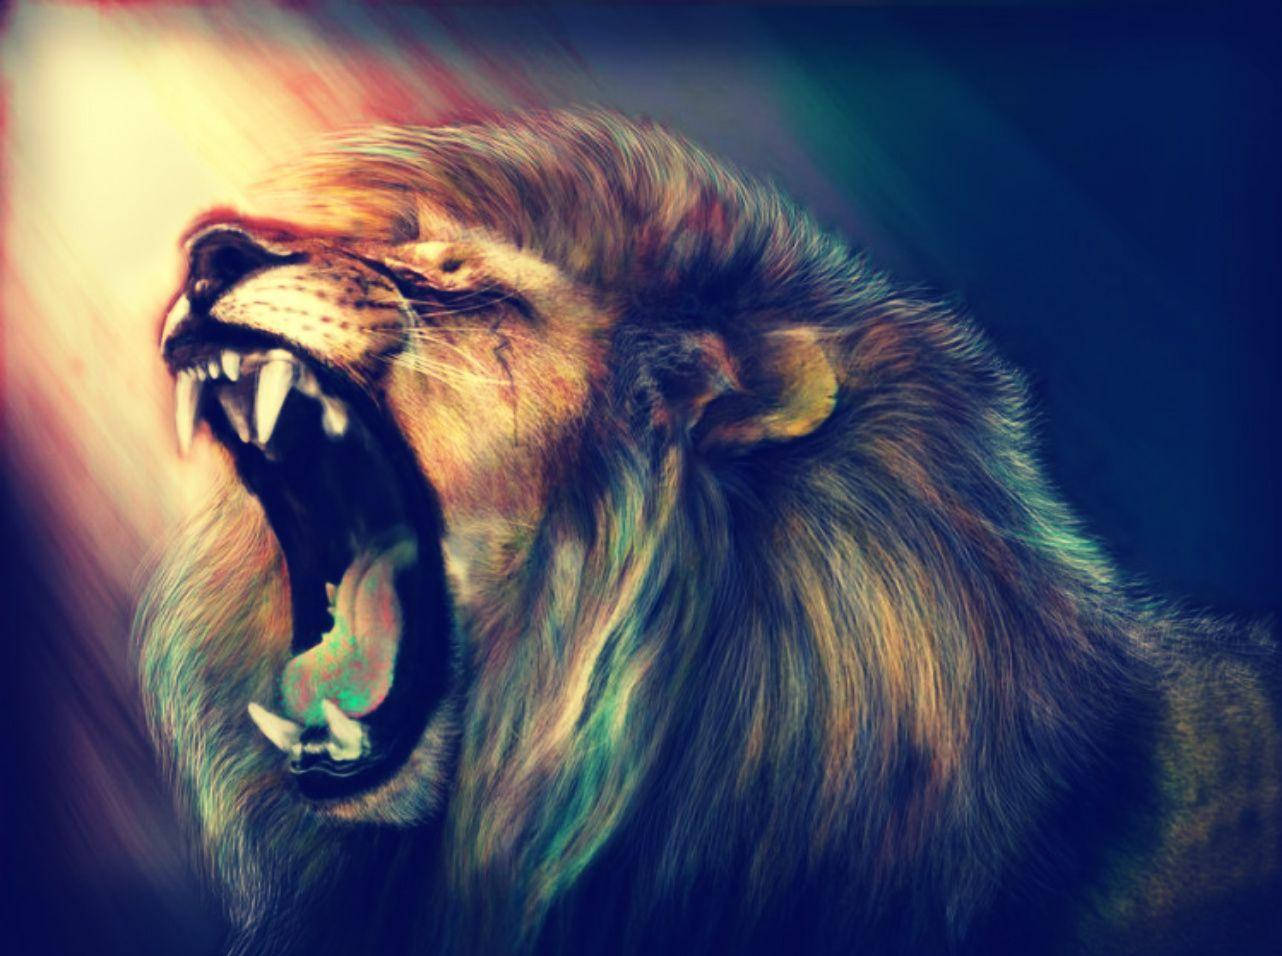 100+] Cool Lion Wallpapers | Wallpapers.com